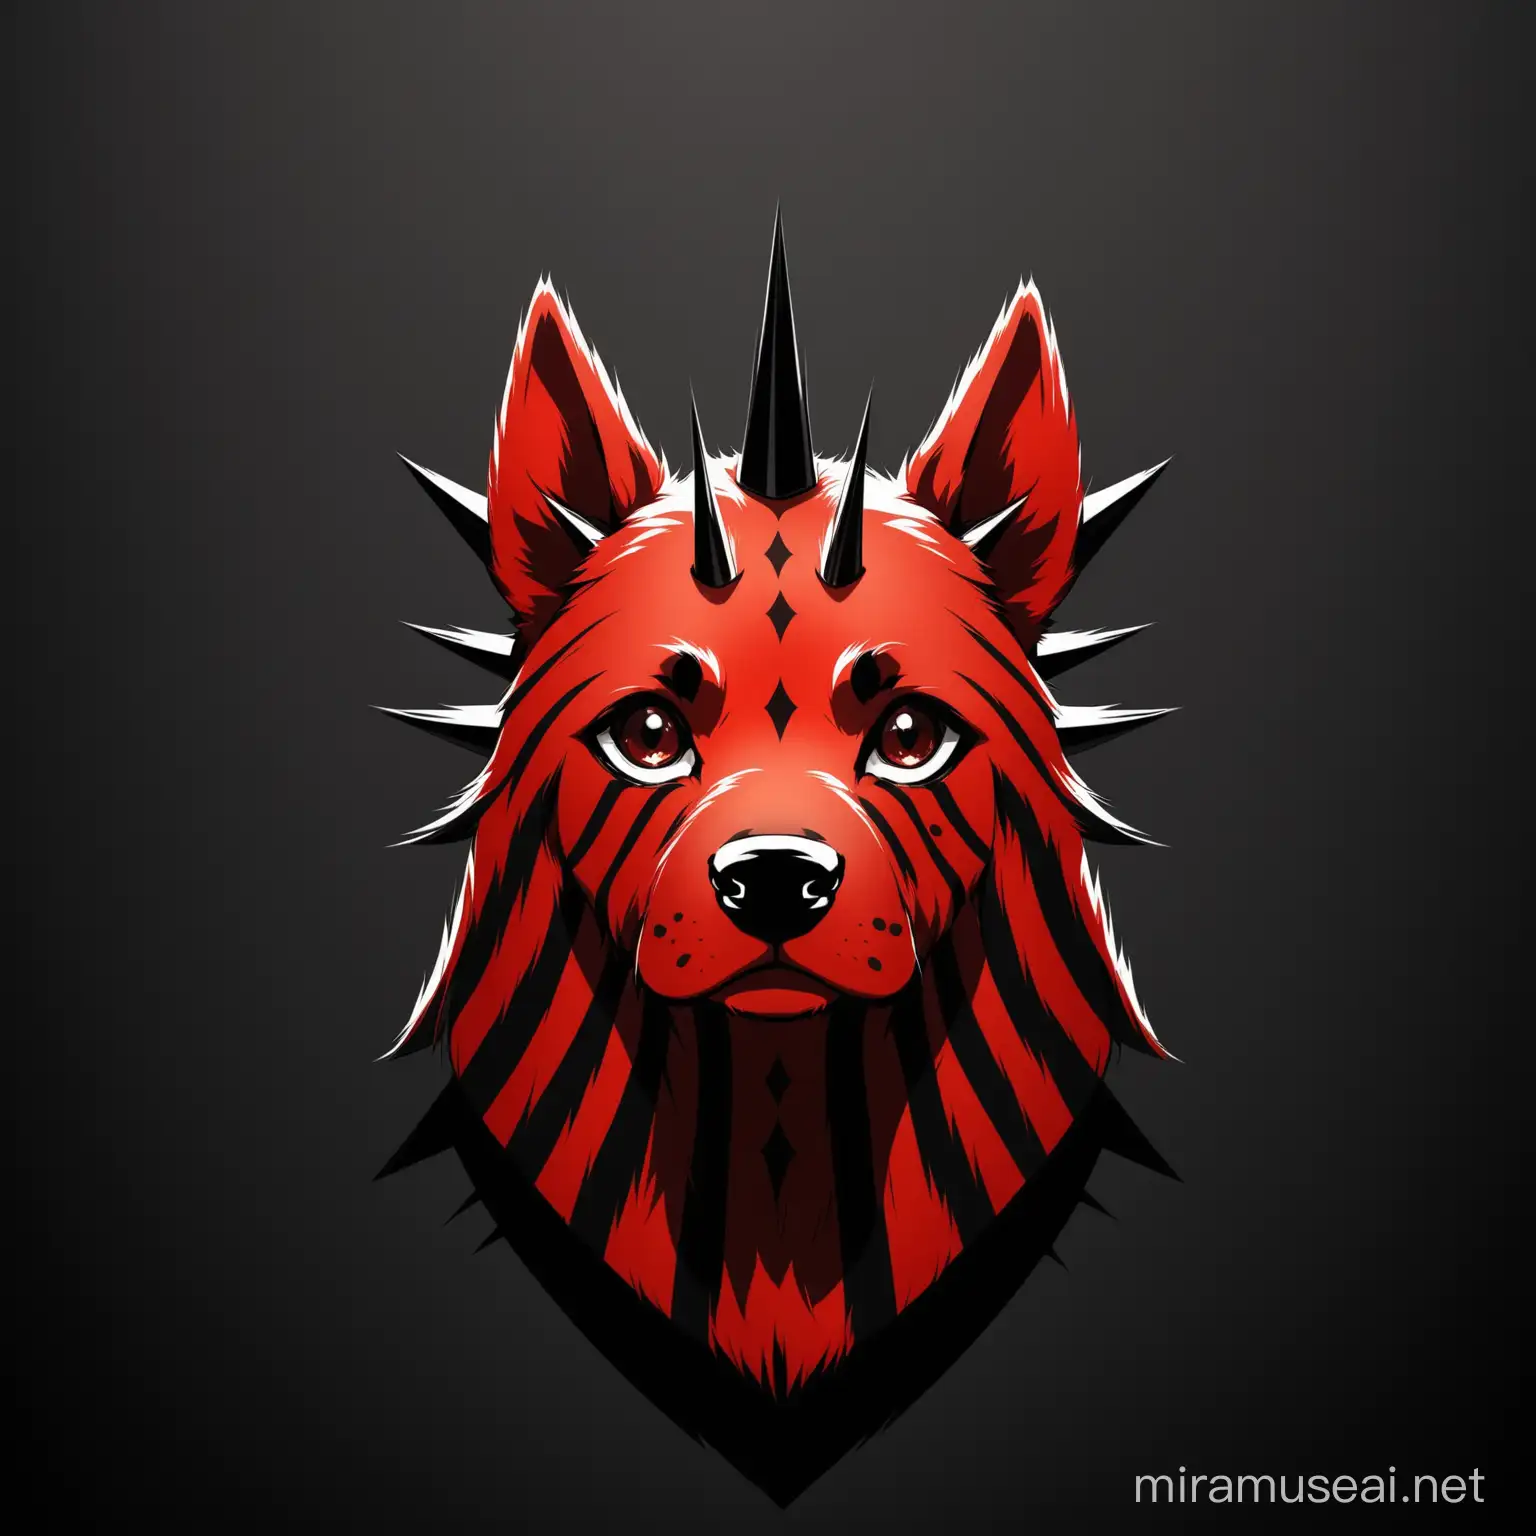 A dog with red skin and black stripes and three small black spikes on its head against a background of black colour and motiffs